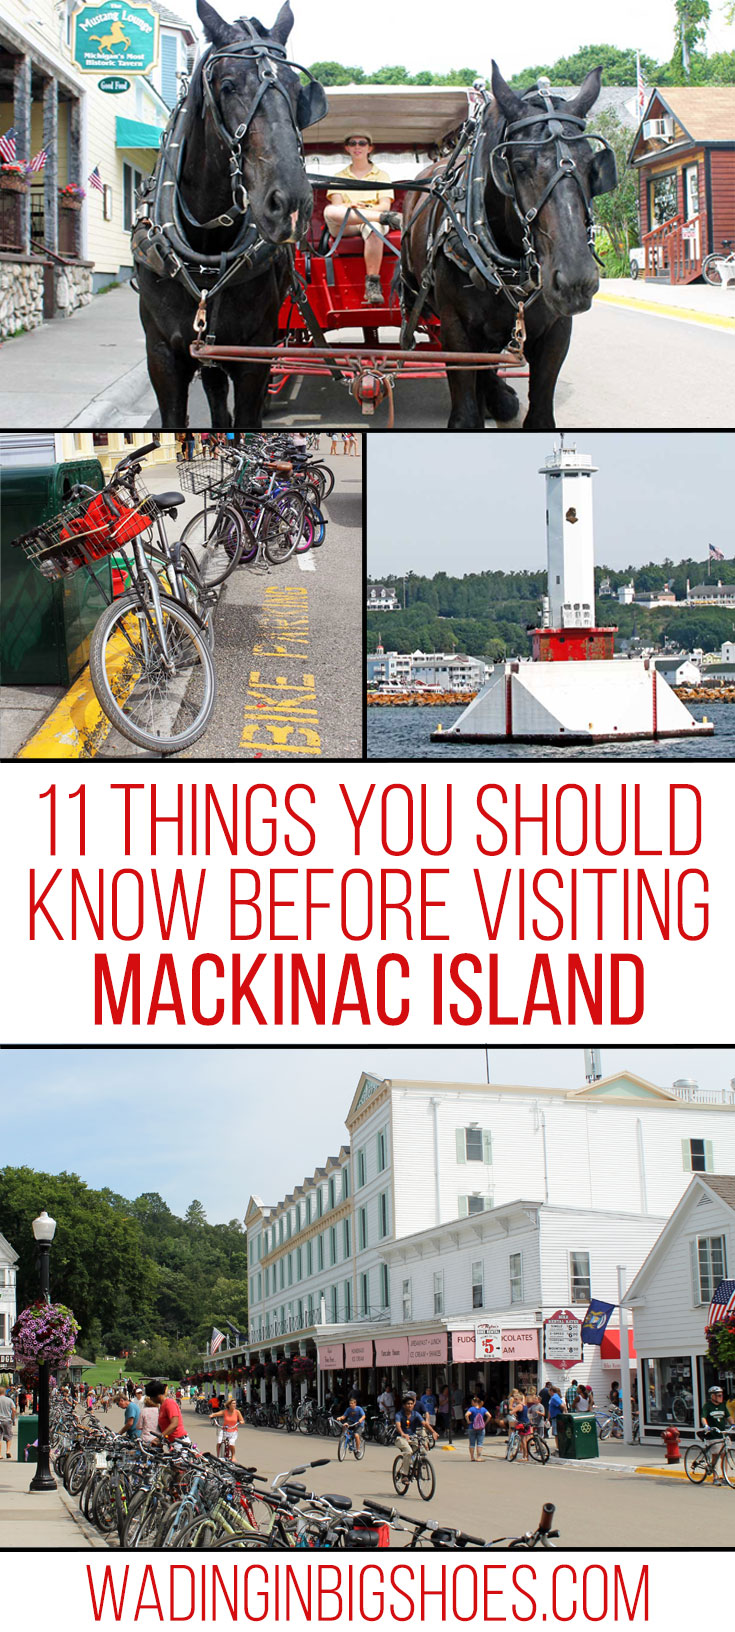 11 Things You Should Know Before Visiting Mackinac Island - tips to help you plan your Mackinac Island vacation! // [via Wading in Big Shoes]